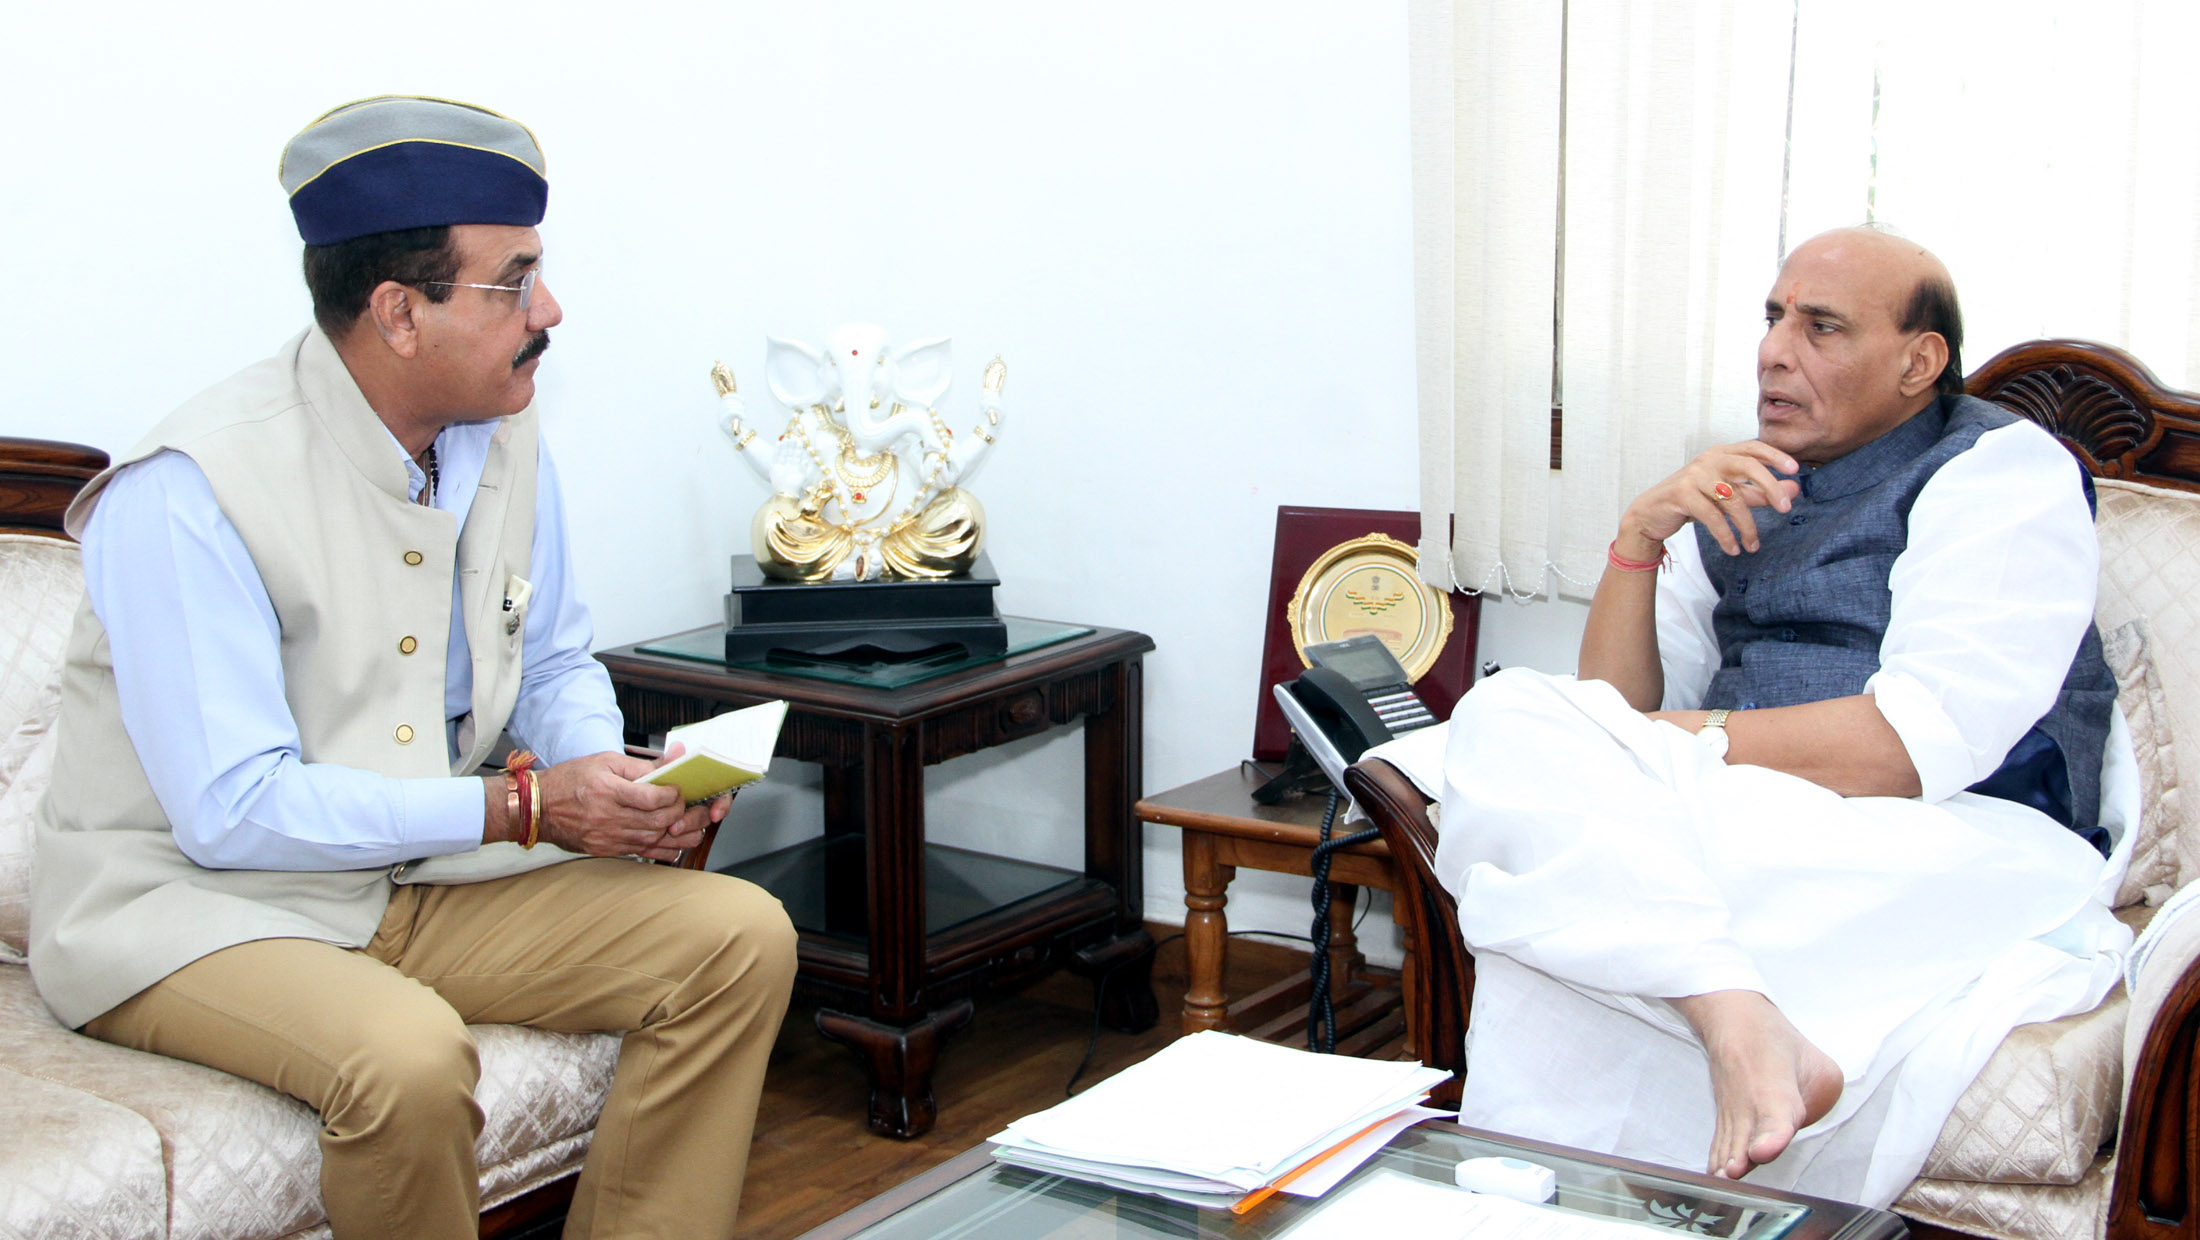 The Lt. Governor of Andaman & Nicobar Islands, Lt. General (Retd.) Shri A.K. Singh calling on the Union Home Minister, Shri Rajnath Singh, in New Delhi on March 13, 2016.